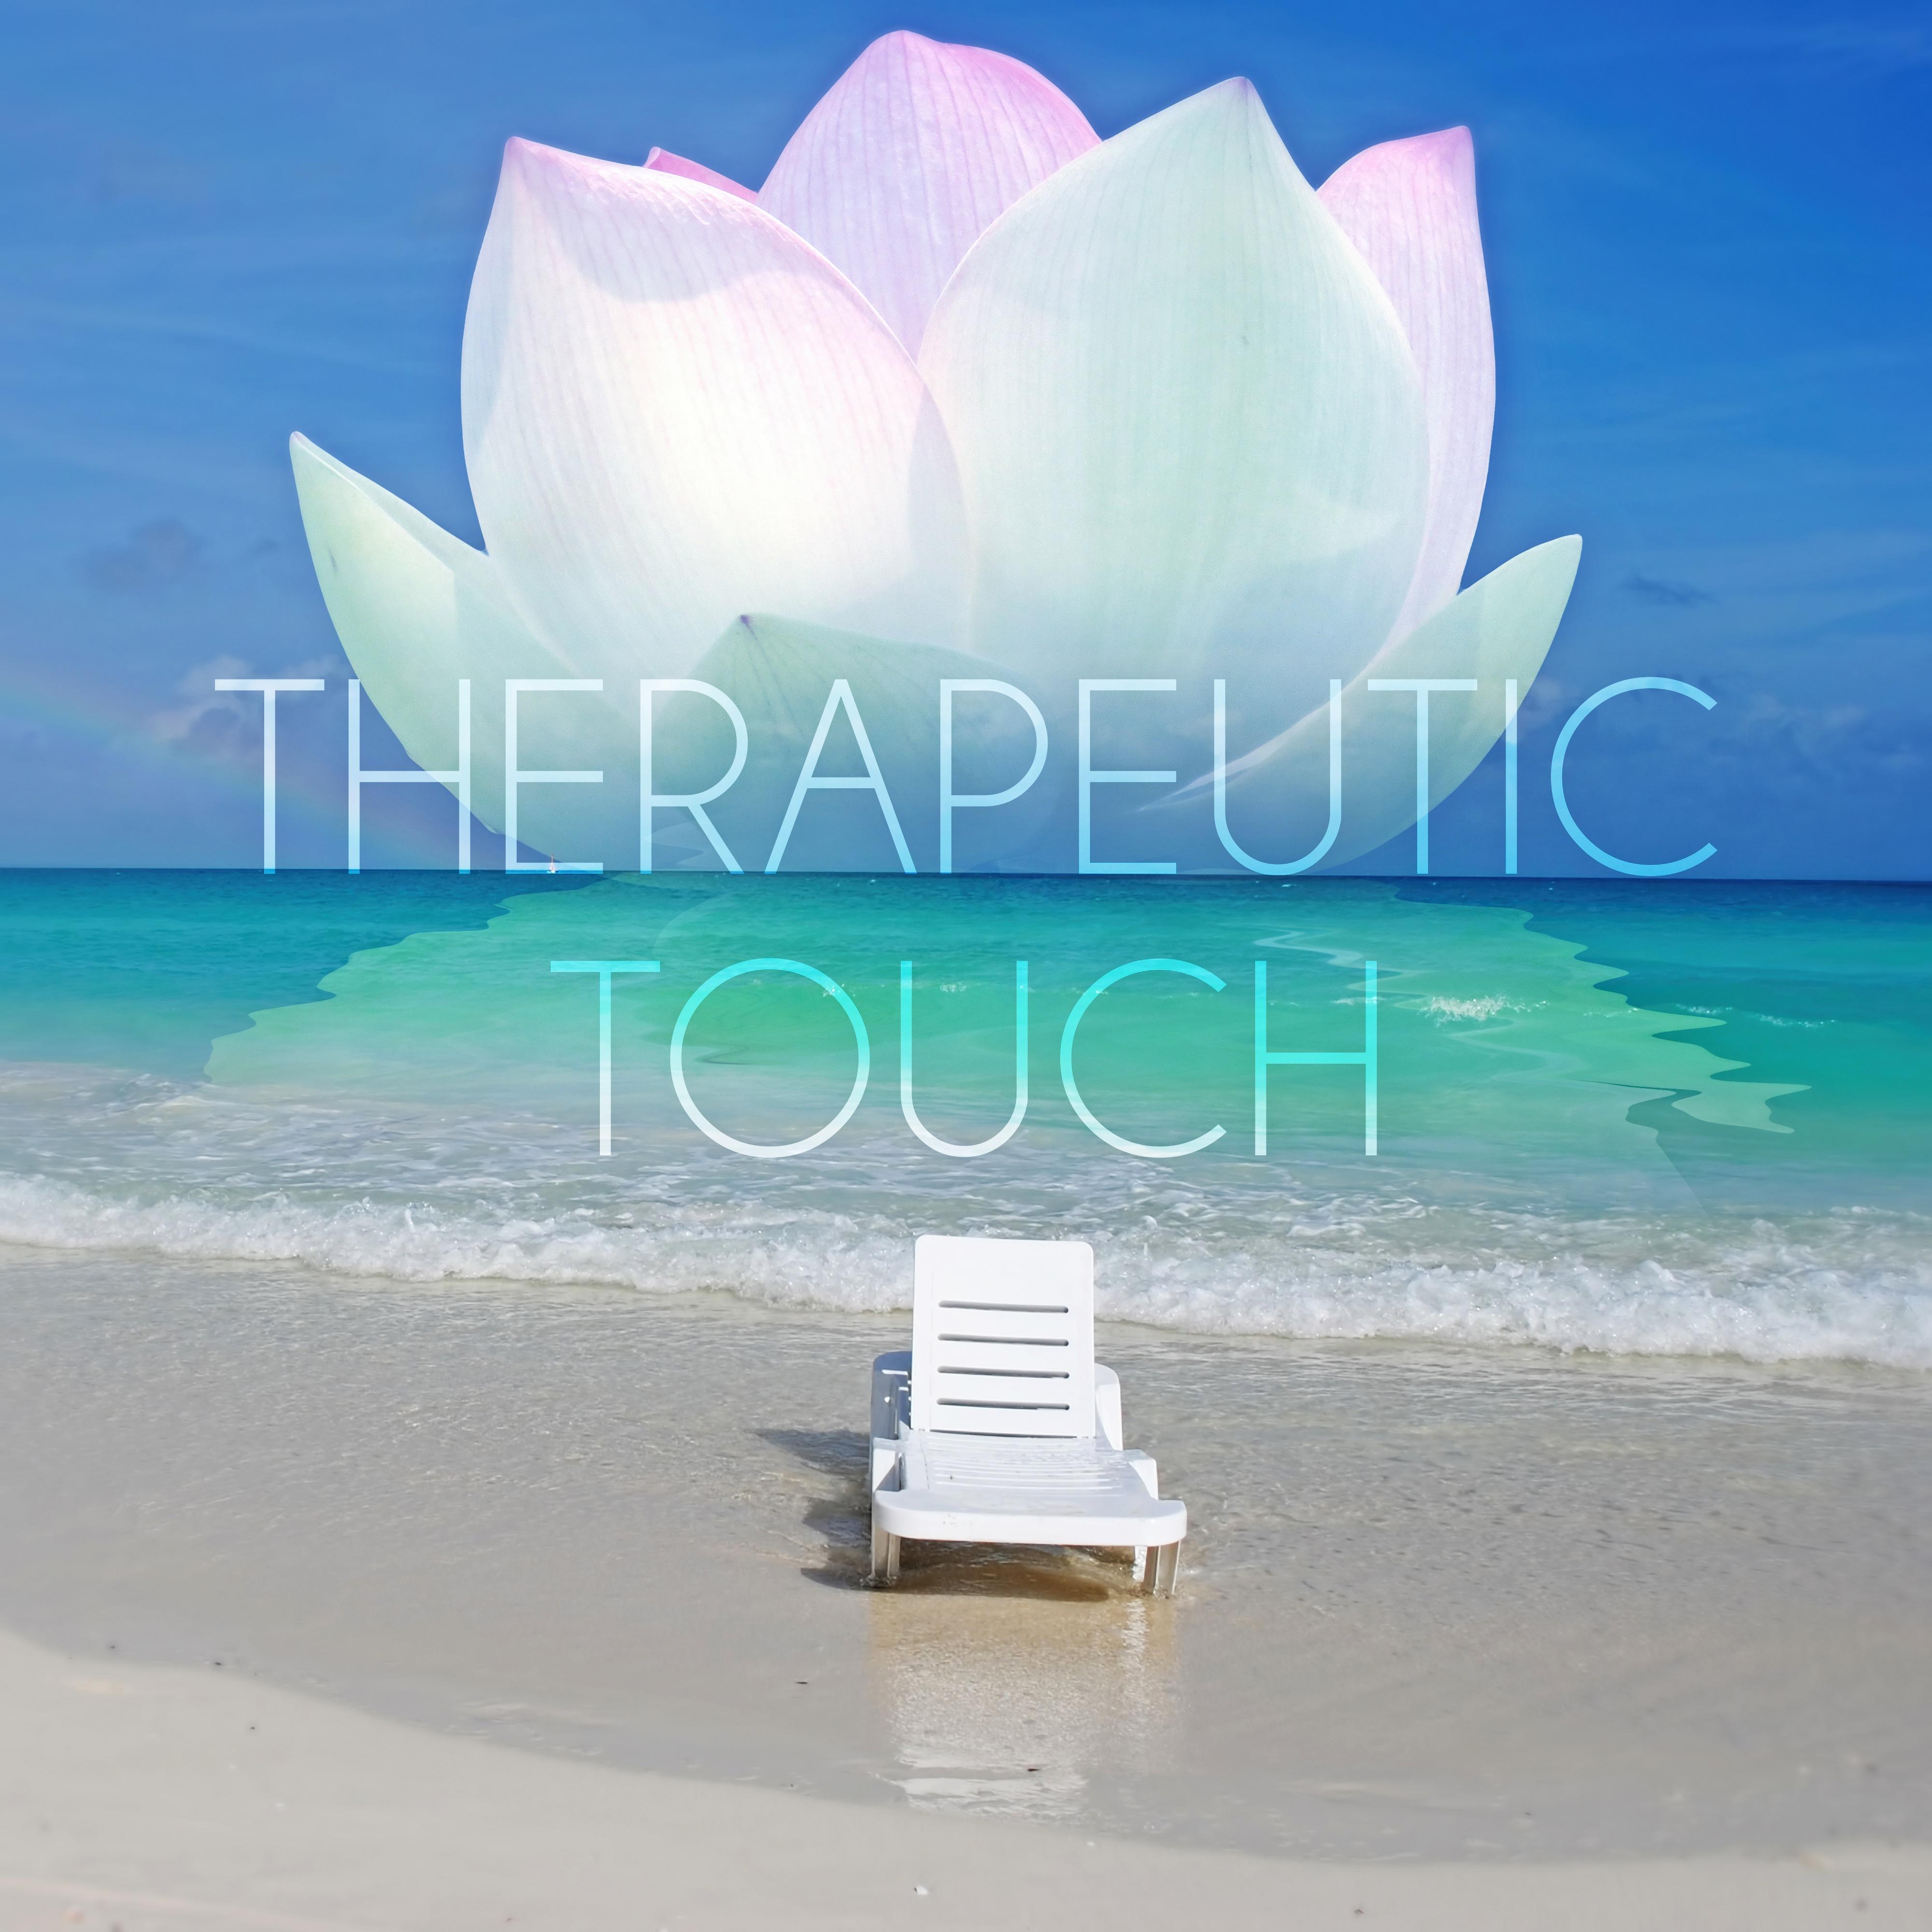 Therapeutic Touch - Relaxing Sensual Spa Music with Water Sound, Pleasure Yourself, Tantra Meditation and Relaxation, Mind and Body Harmony, Mental Health, Stress Relief, Healing Massage